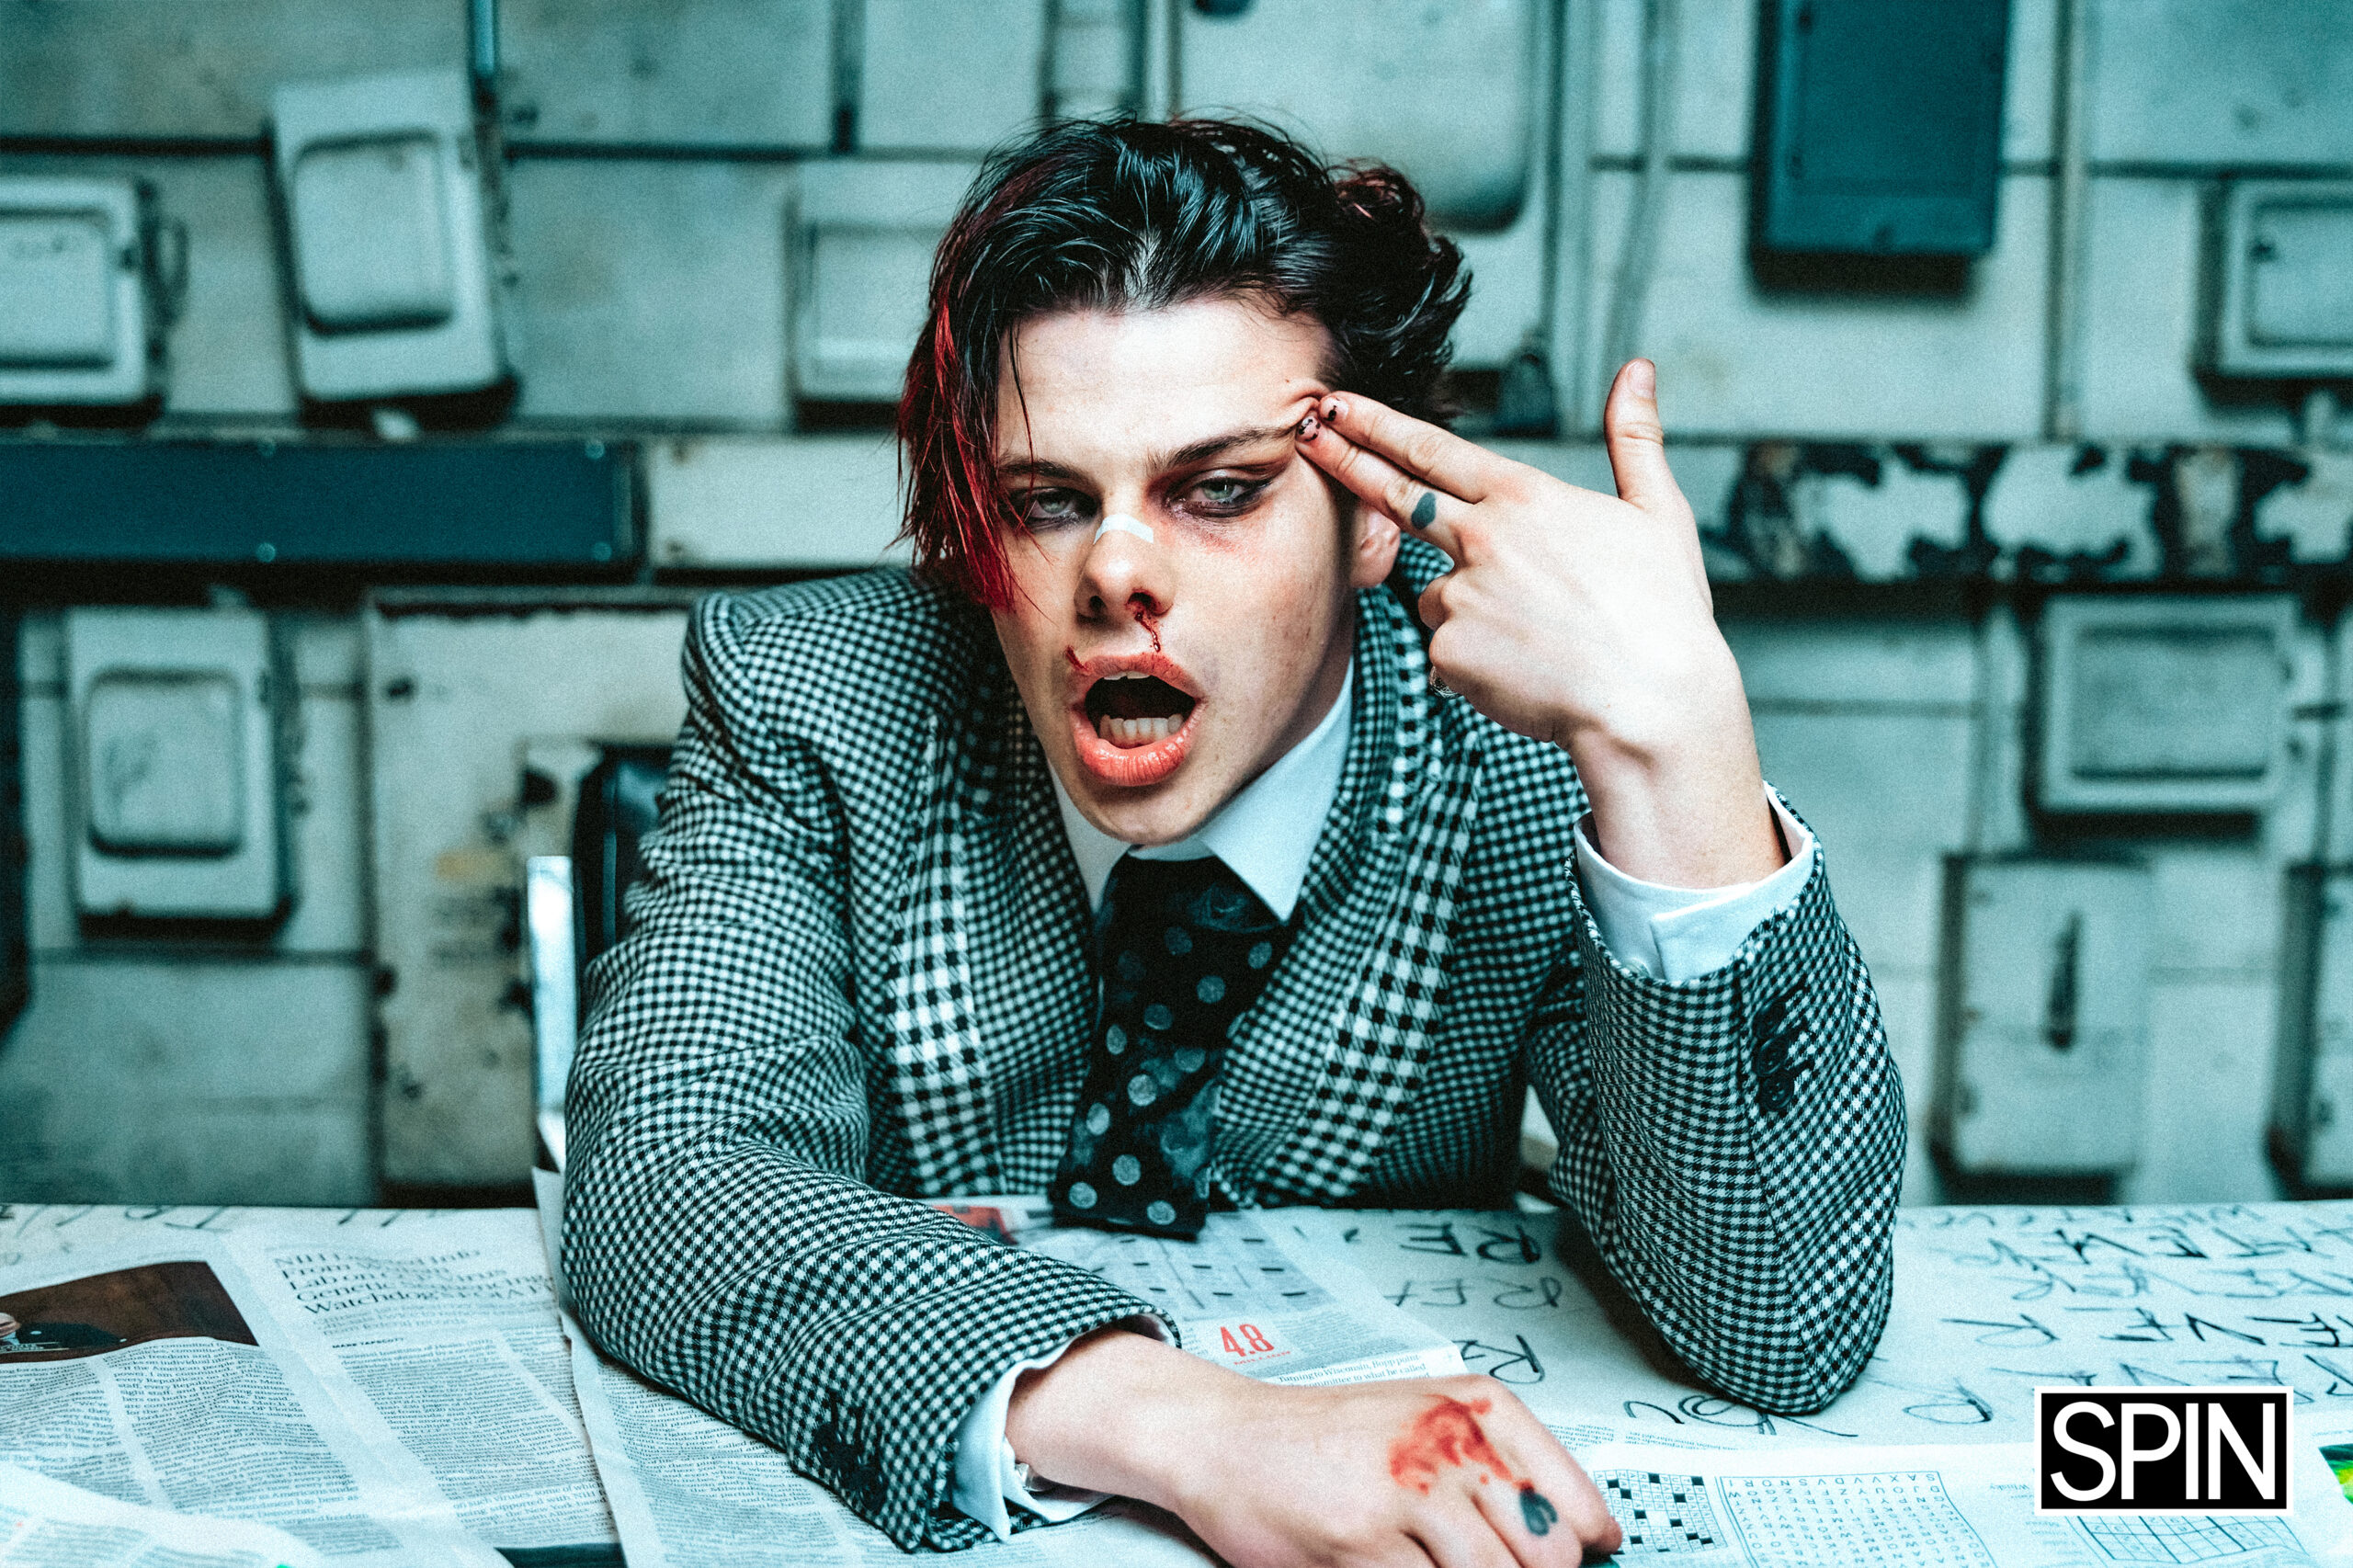 Yungblud and Fans Get Drenched and Shut Down by Police in New Video